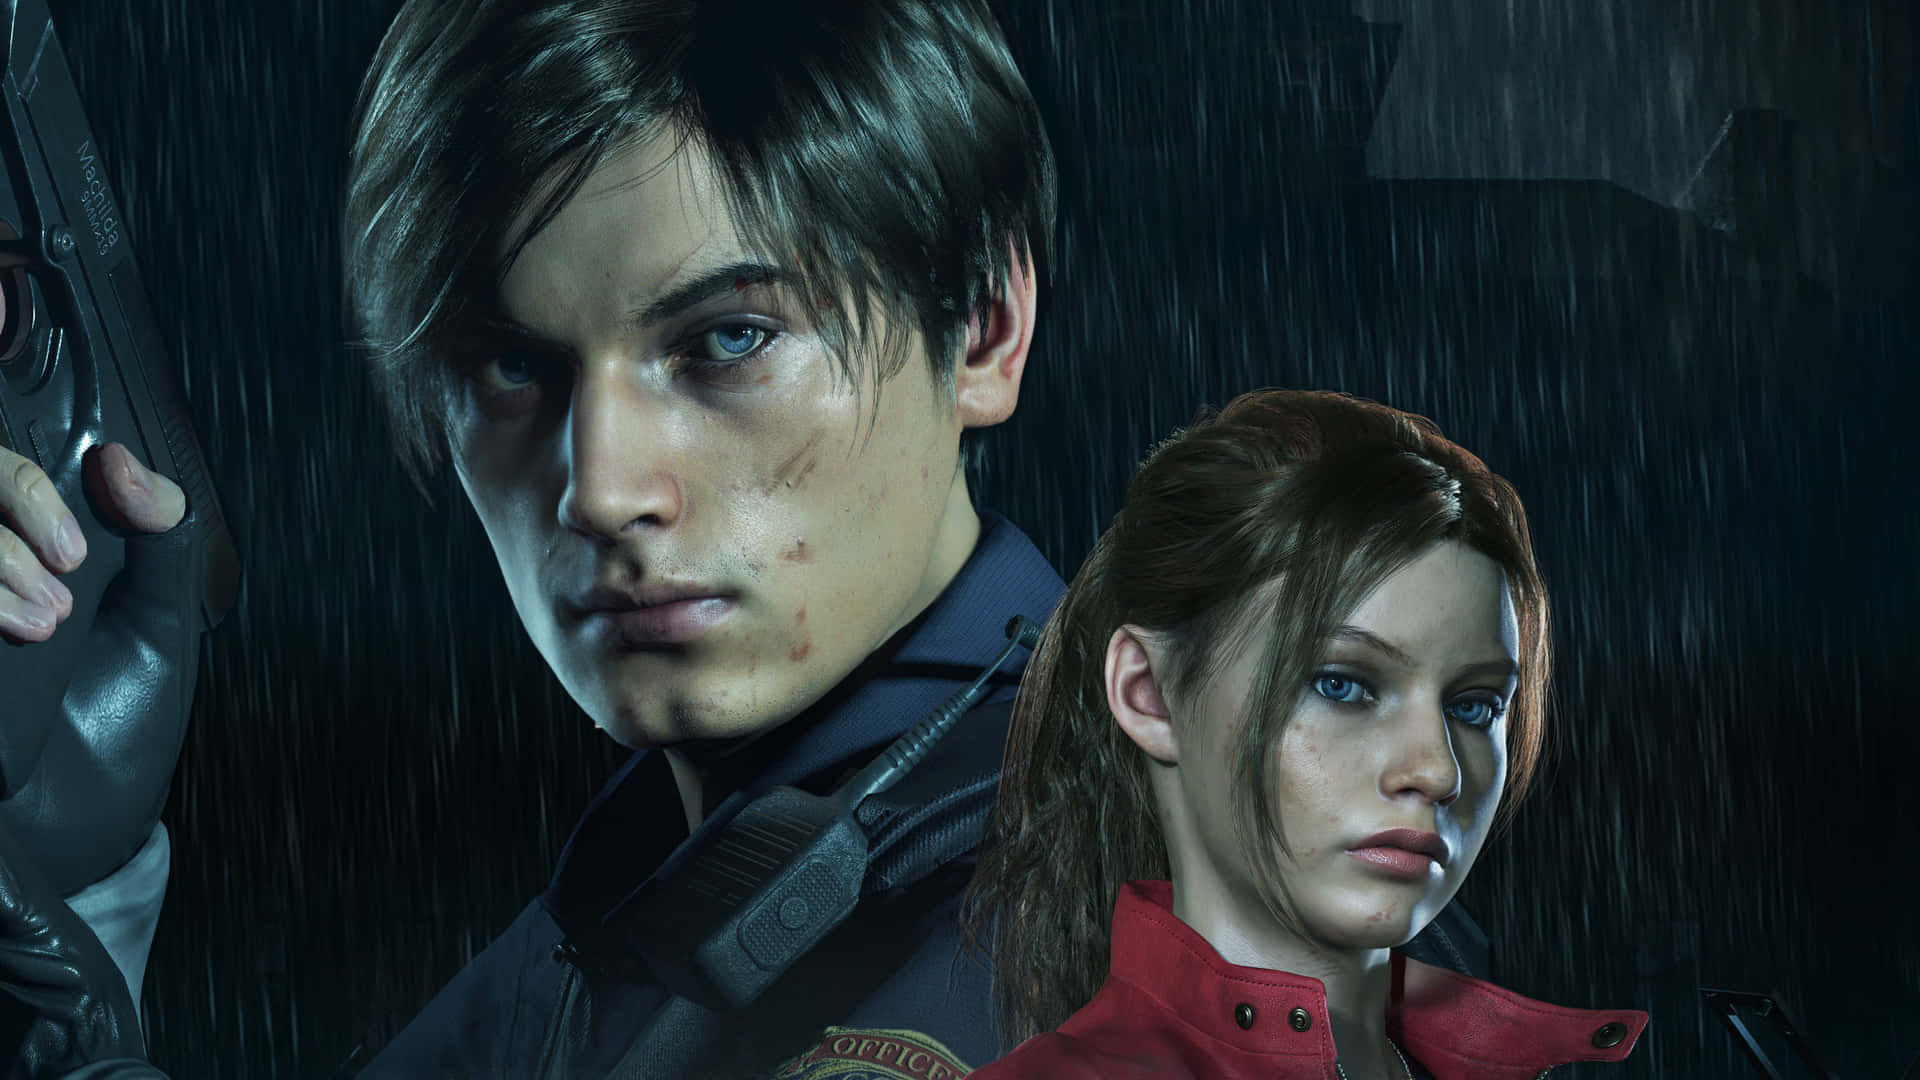 Leon Kennedy and Claire Redfield equip for the fight against the undead hordes in 'Resident Evil 2'